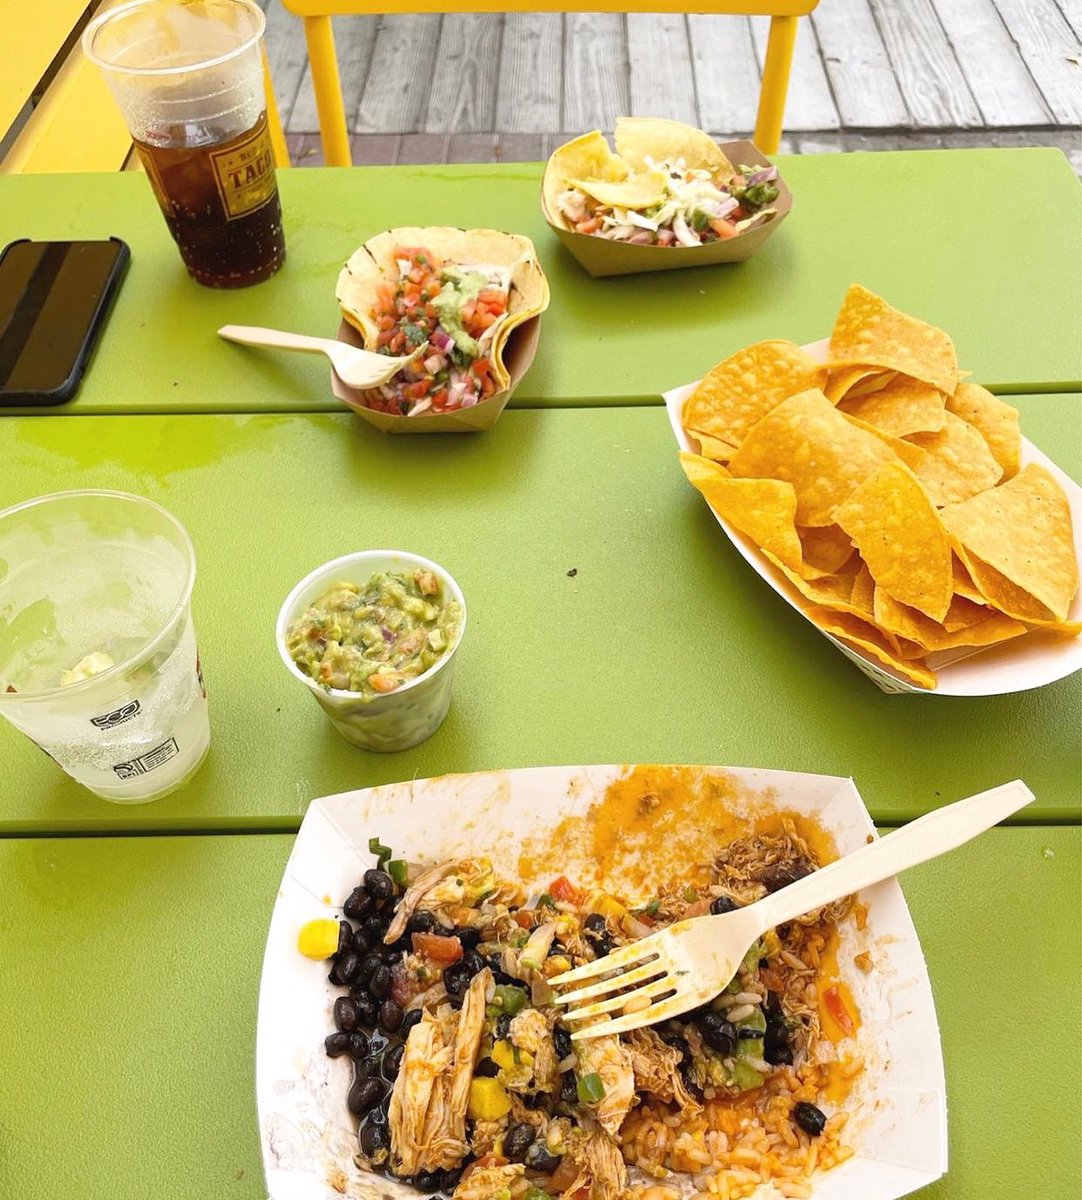 Tag a friend & make plans to catch up over tacos & margs. ❤️ 📷: @makenziebarnes_